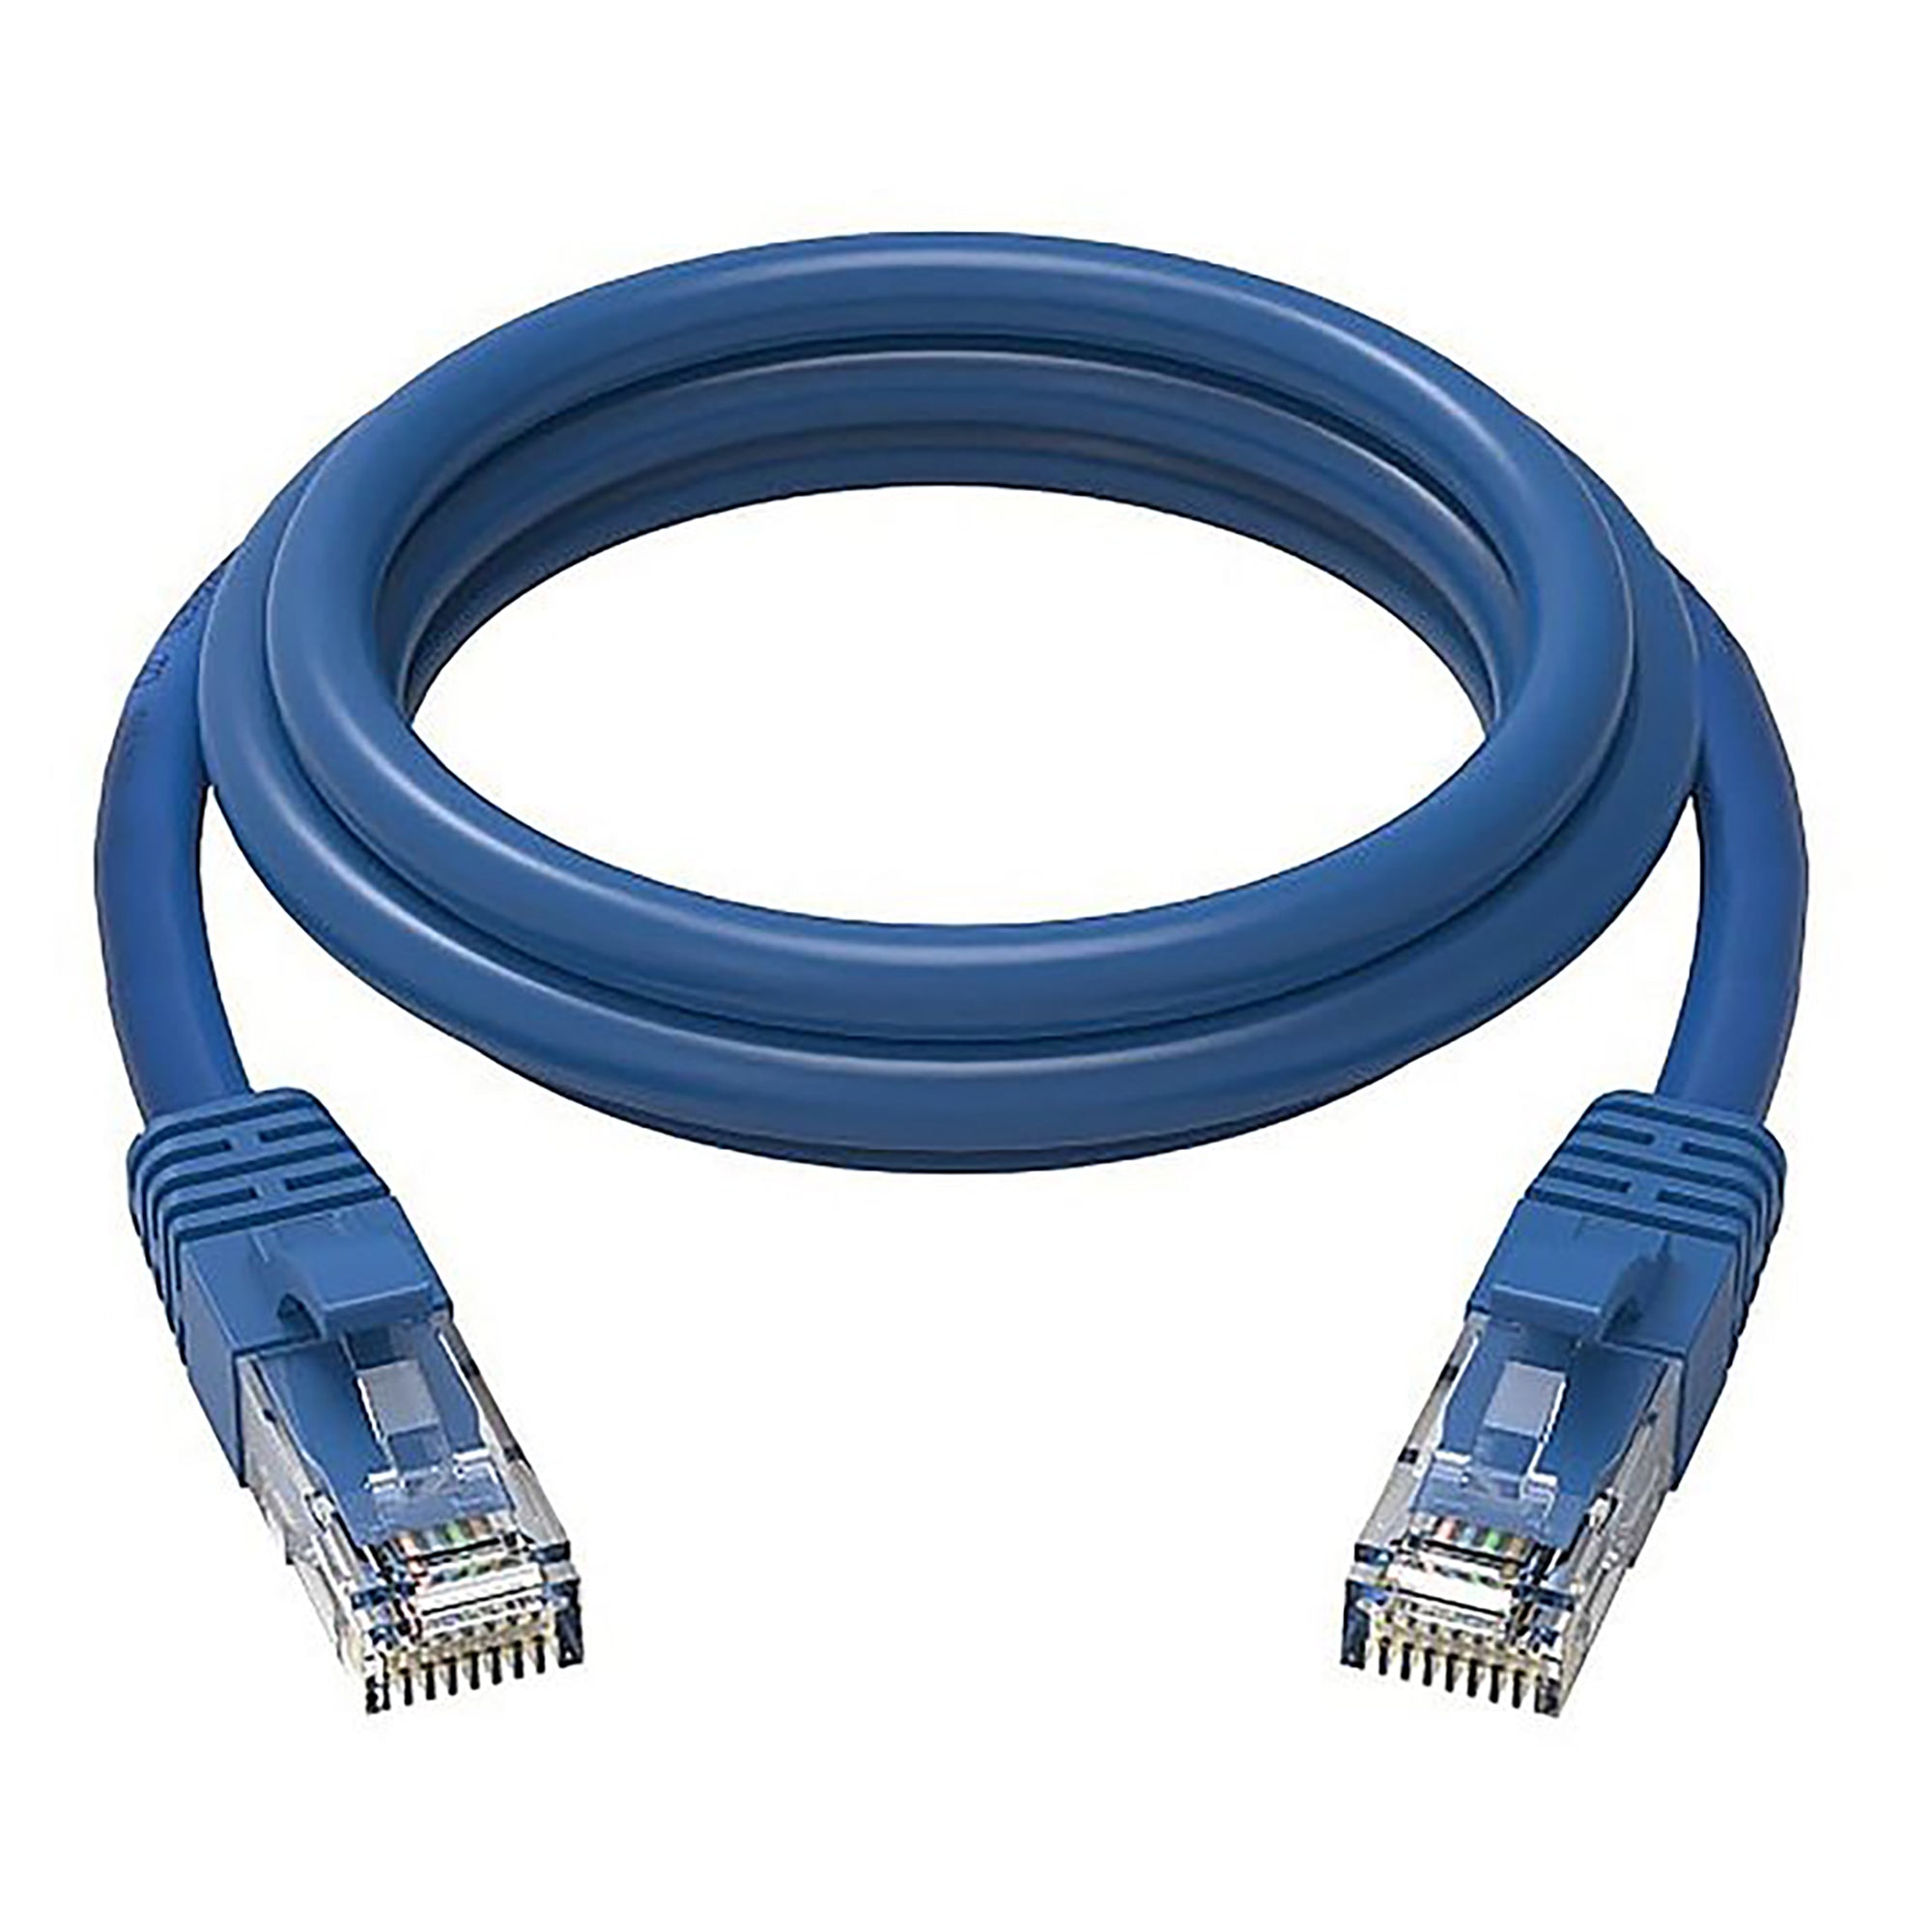 Cruxtec RC6-030-BL CAT6 10GbE Ethernet Cable, Blue (3 mtrs)